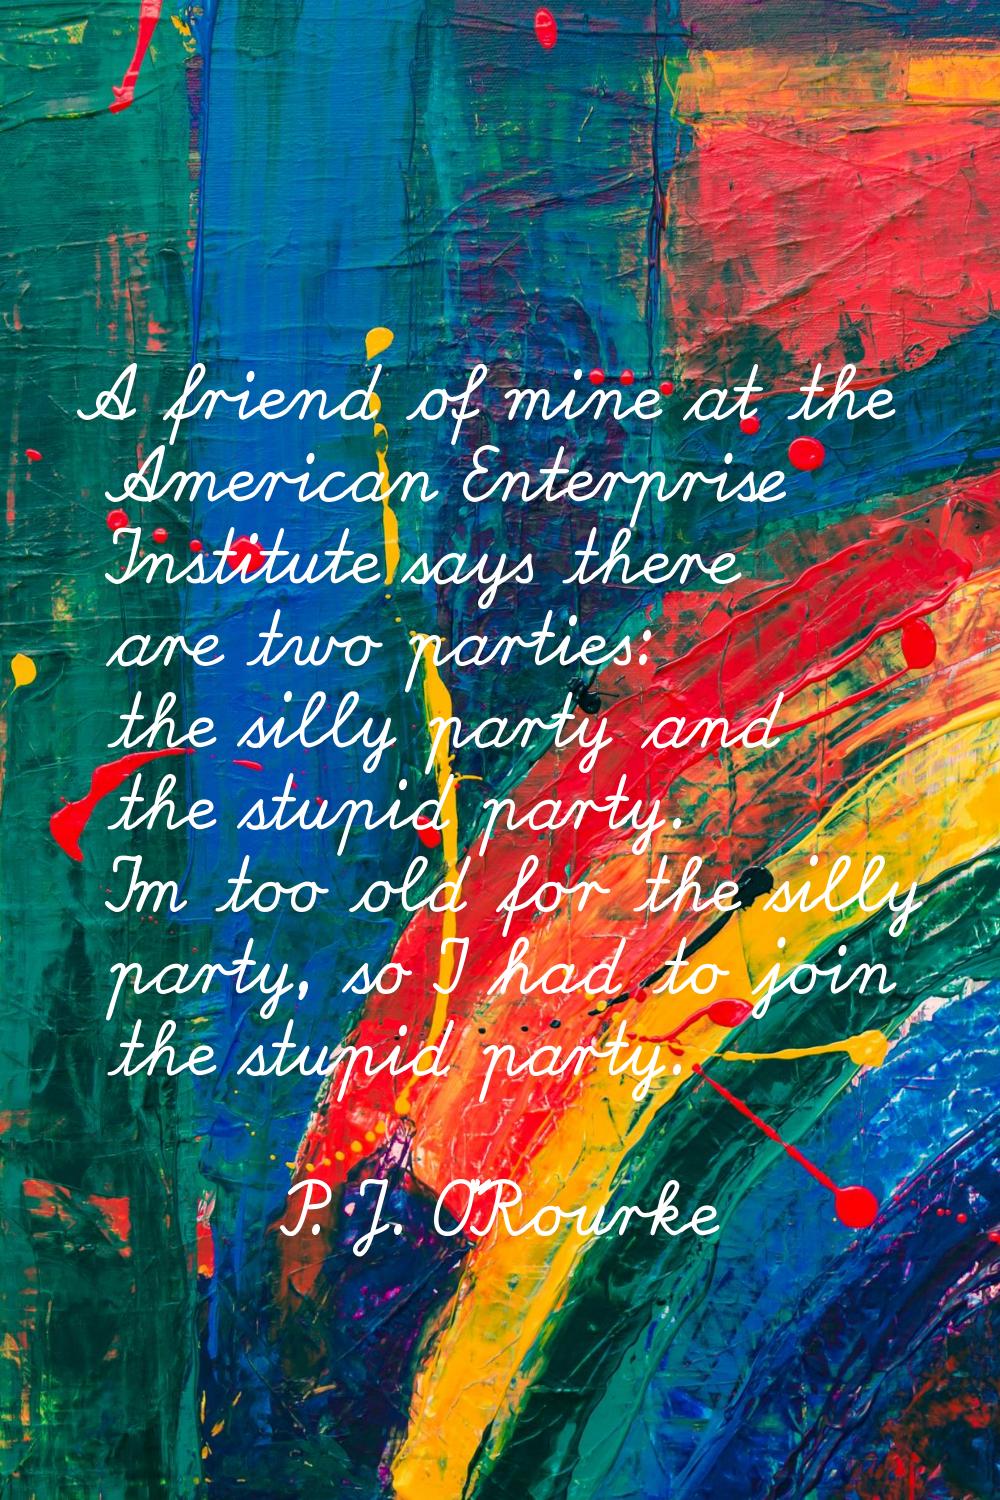 A friend of mine at the American Enterprise Institute says there are two parties: the silly party a